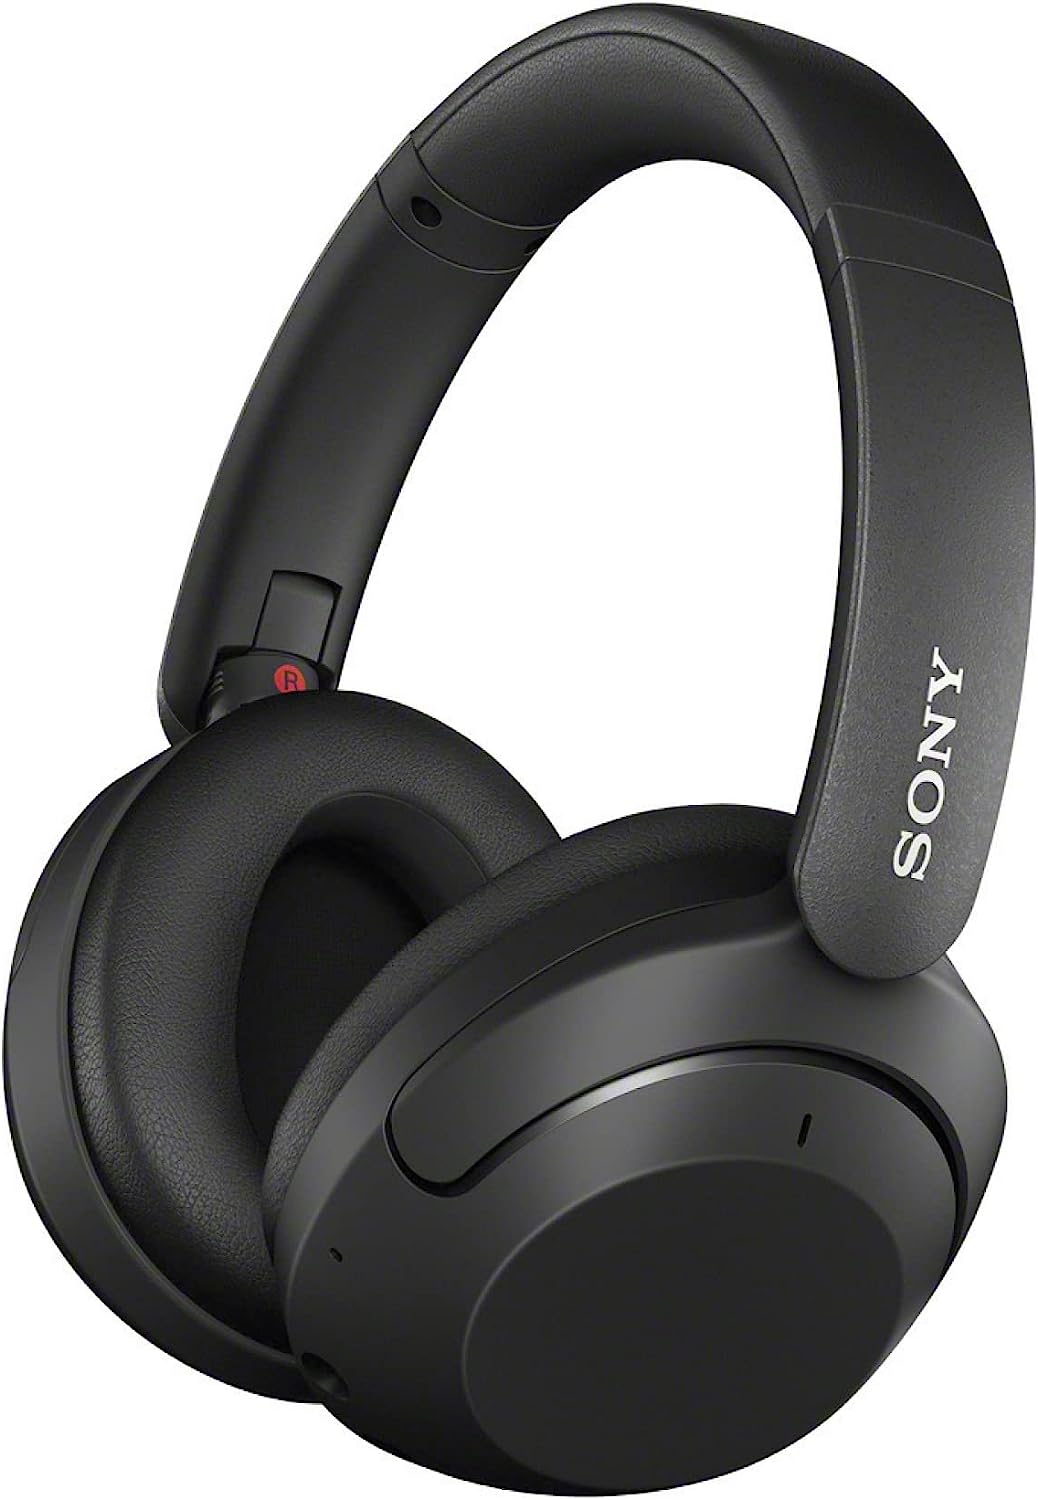 WH-XB910N Wireless Noise Canceling Headphones - EXTRA BASS™